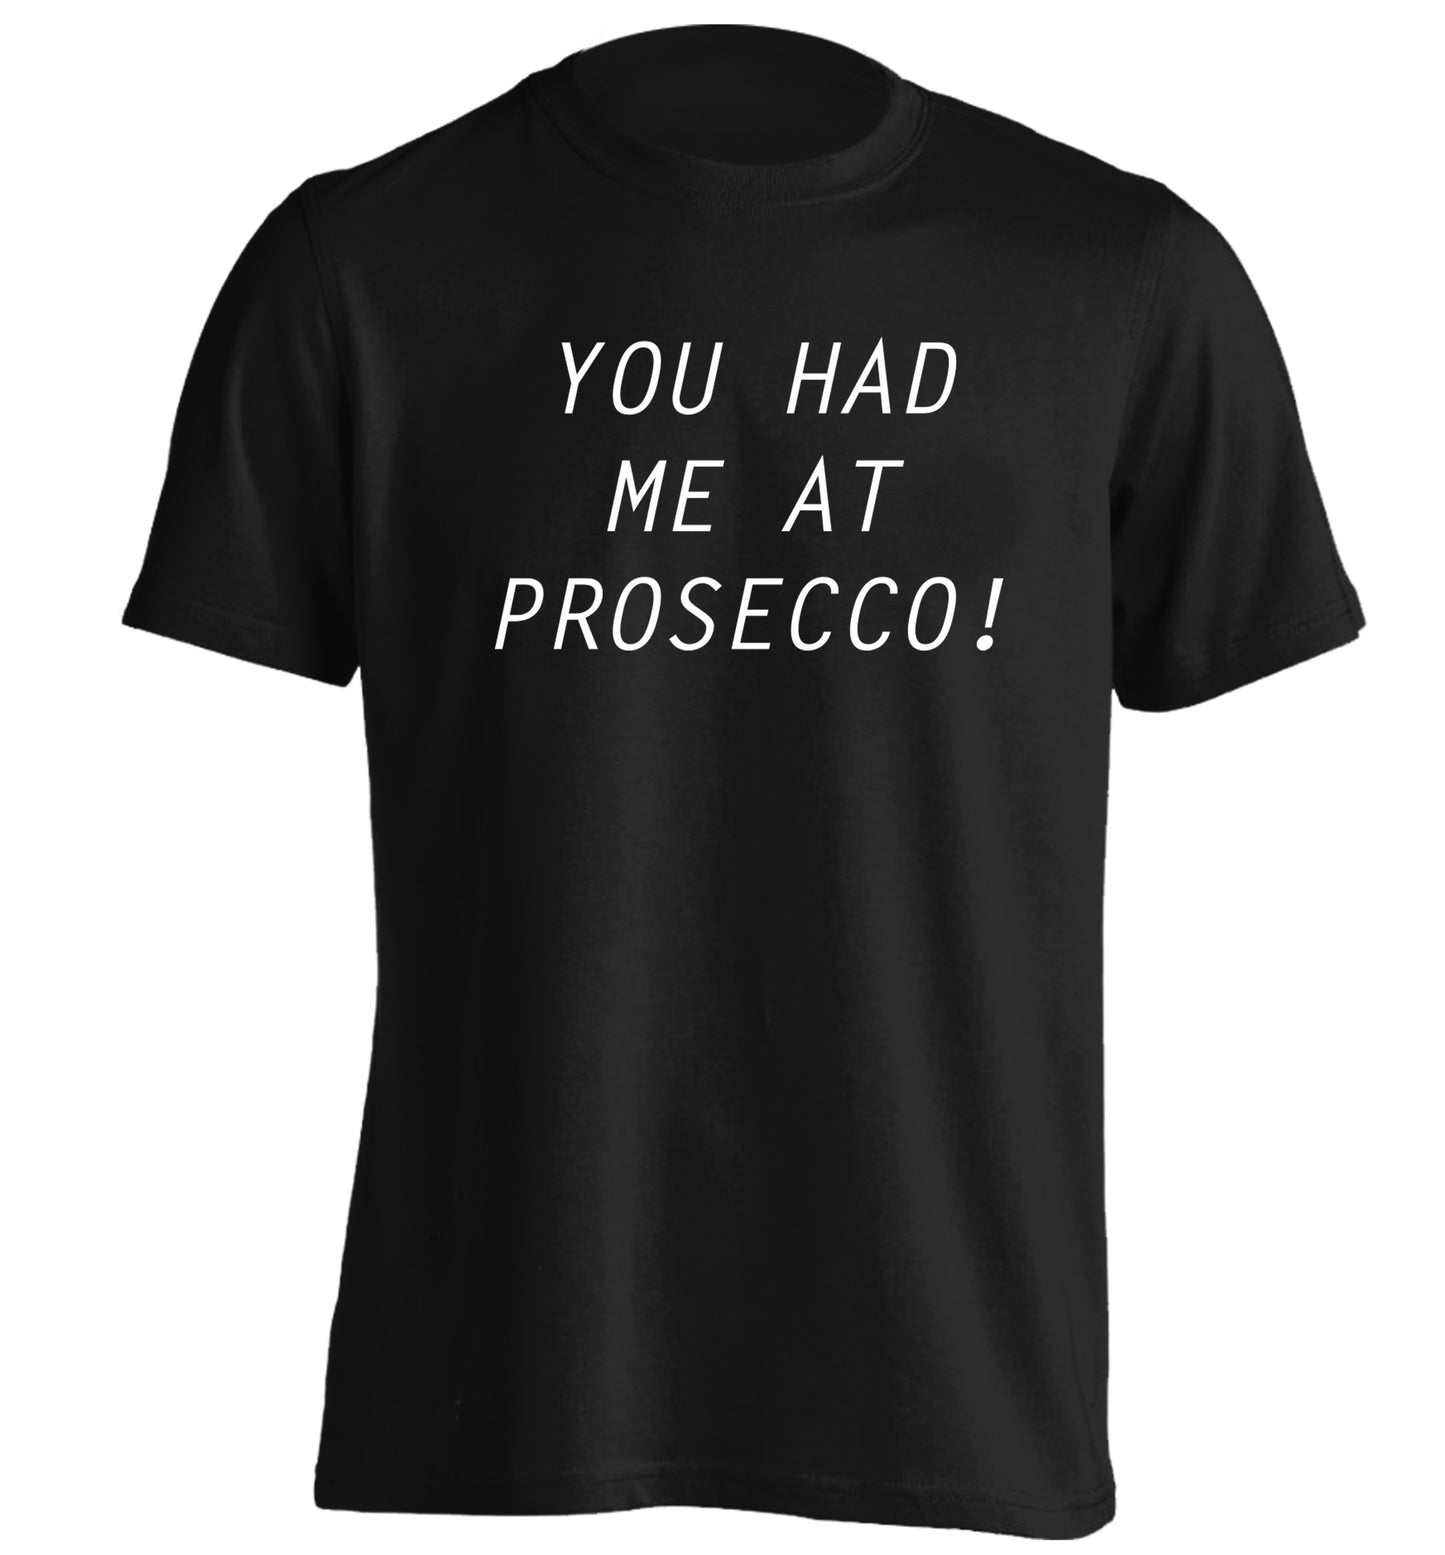 You had me at prosecco adults unisex black Tshirt 2XL